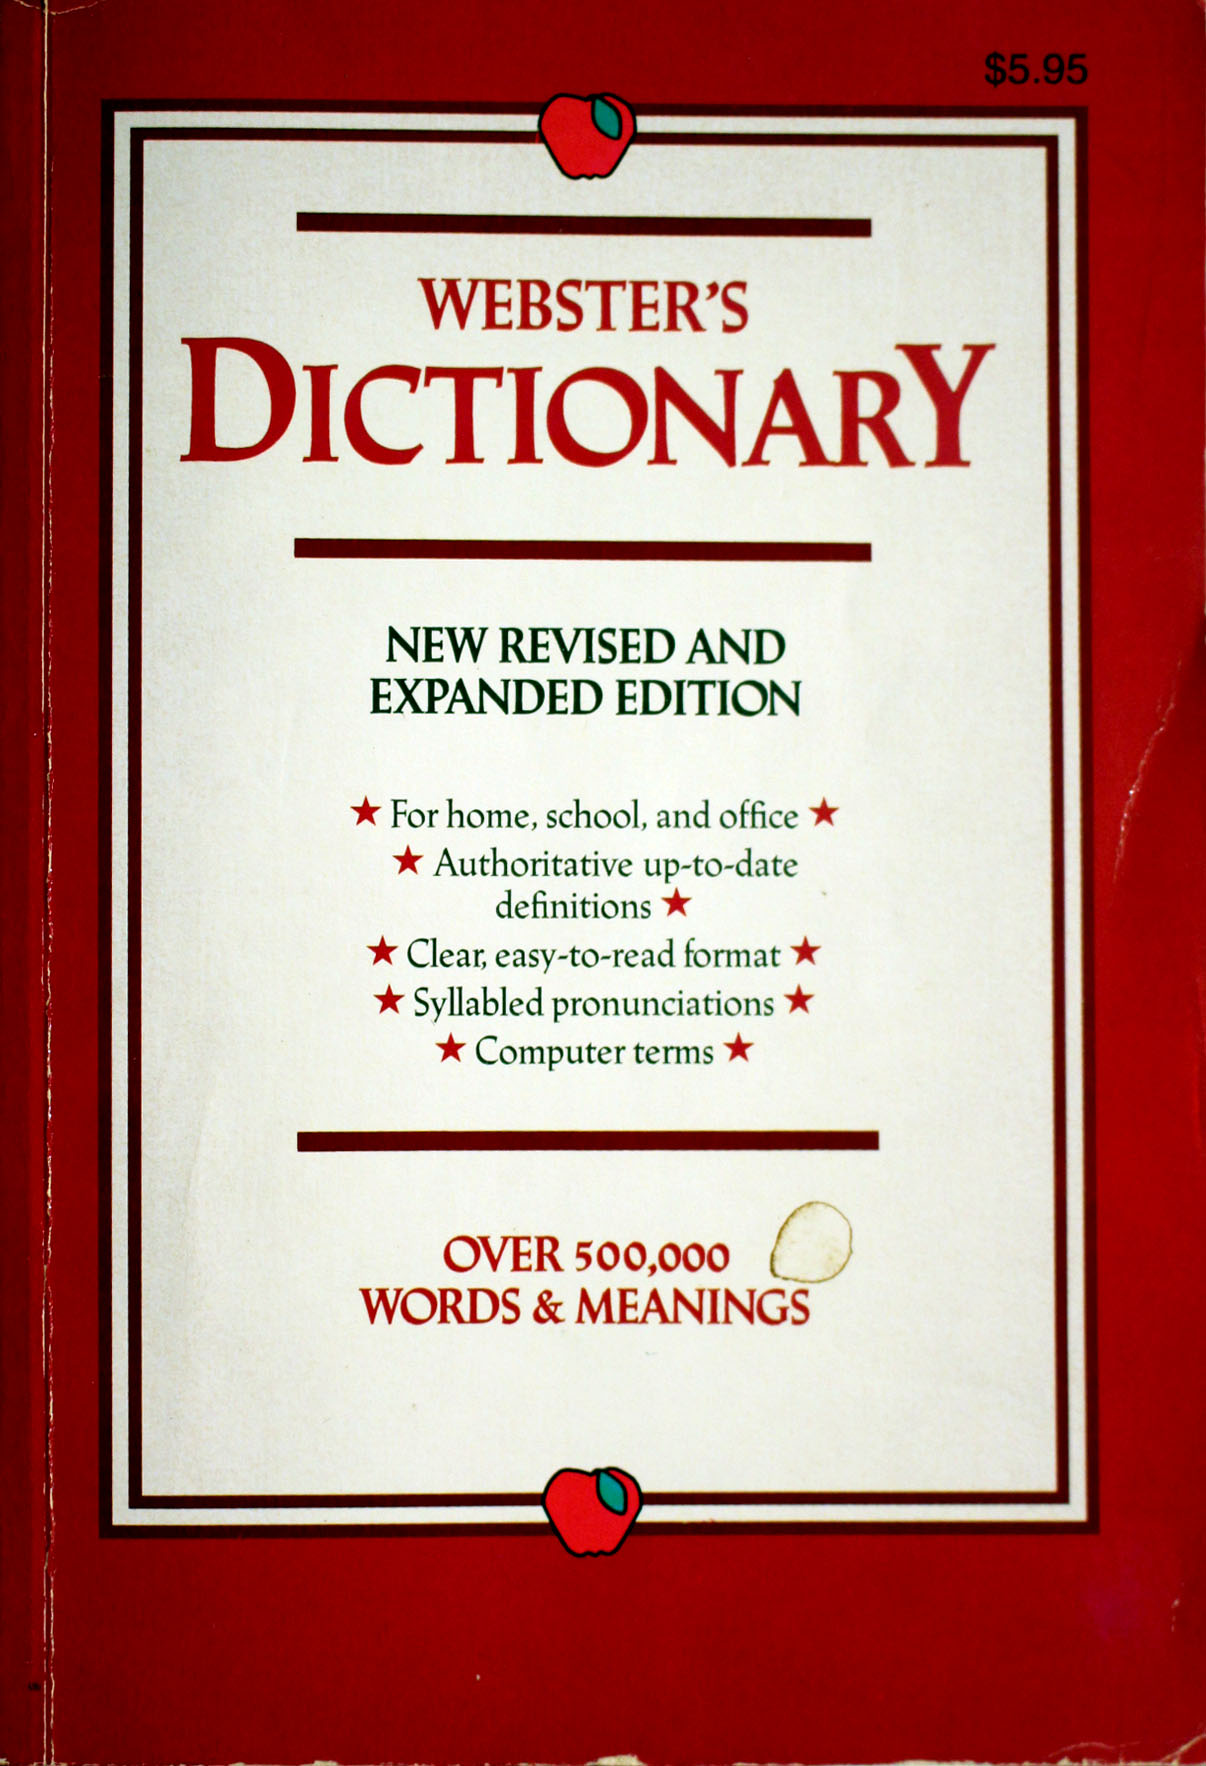 critical thinking webster dictionary